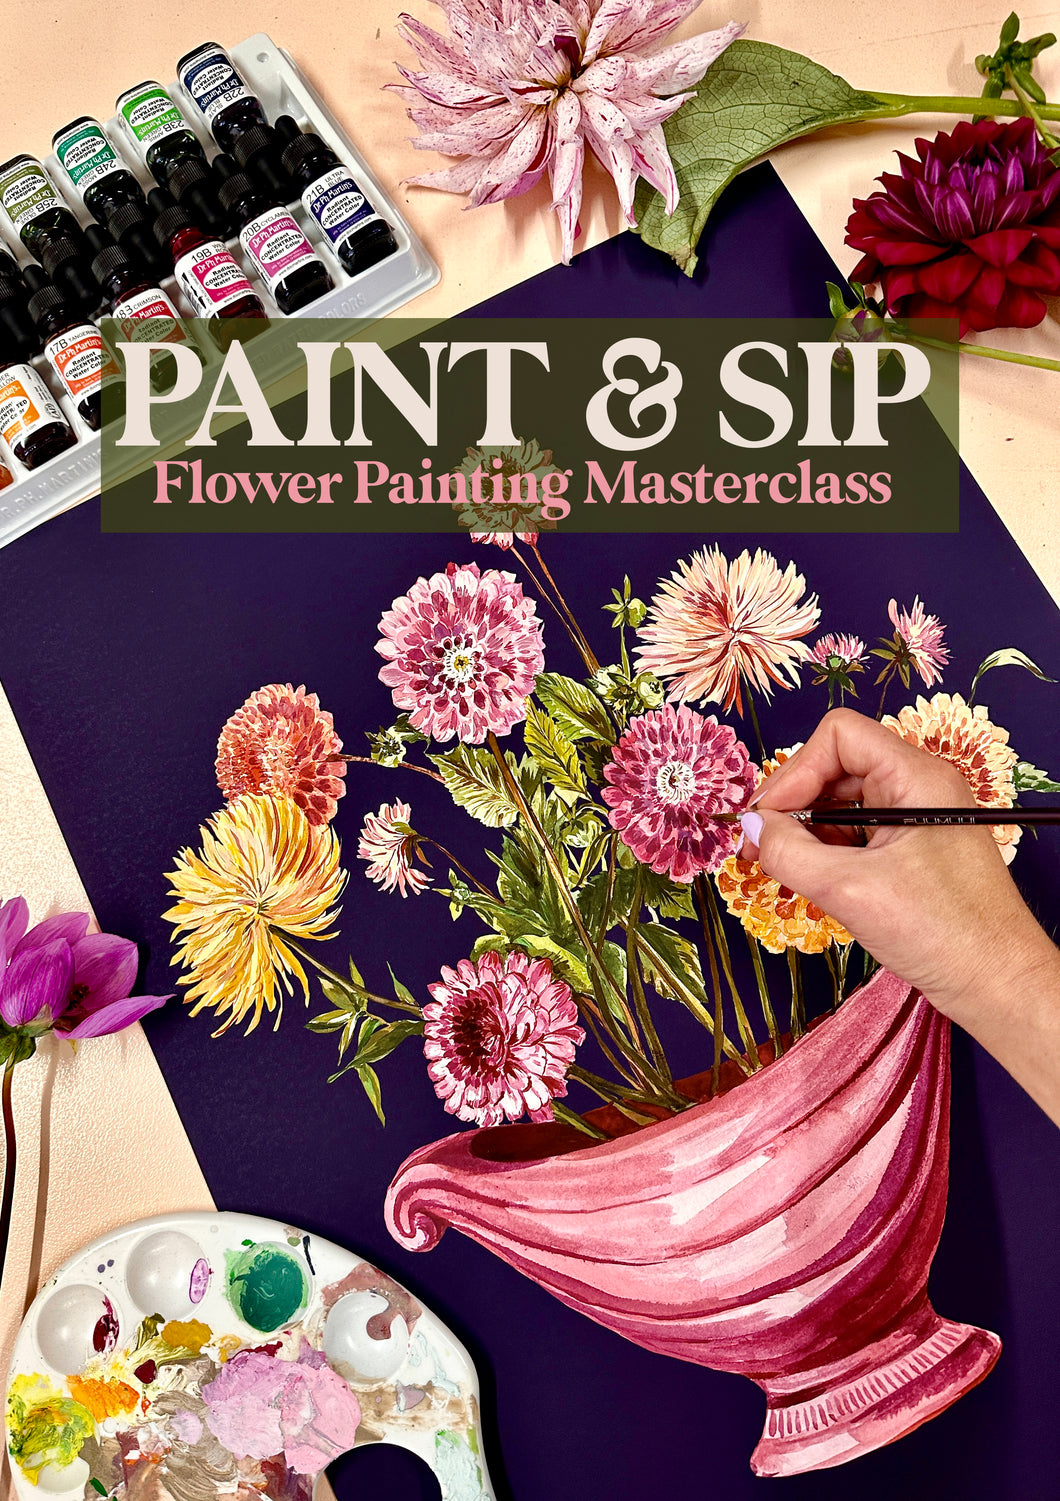 Paint & Sip: Flower Painting Masterclass- Wednesday, 1st November- 7-9pm